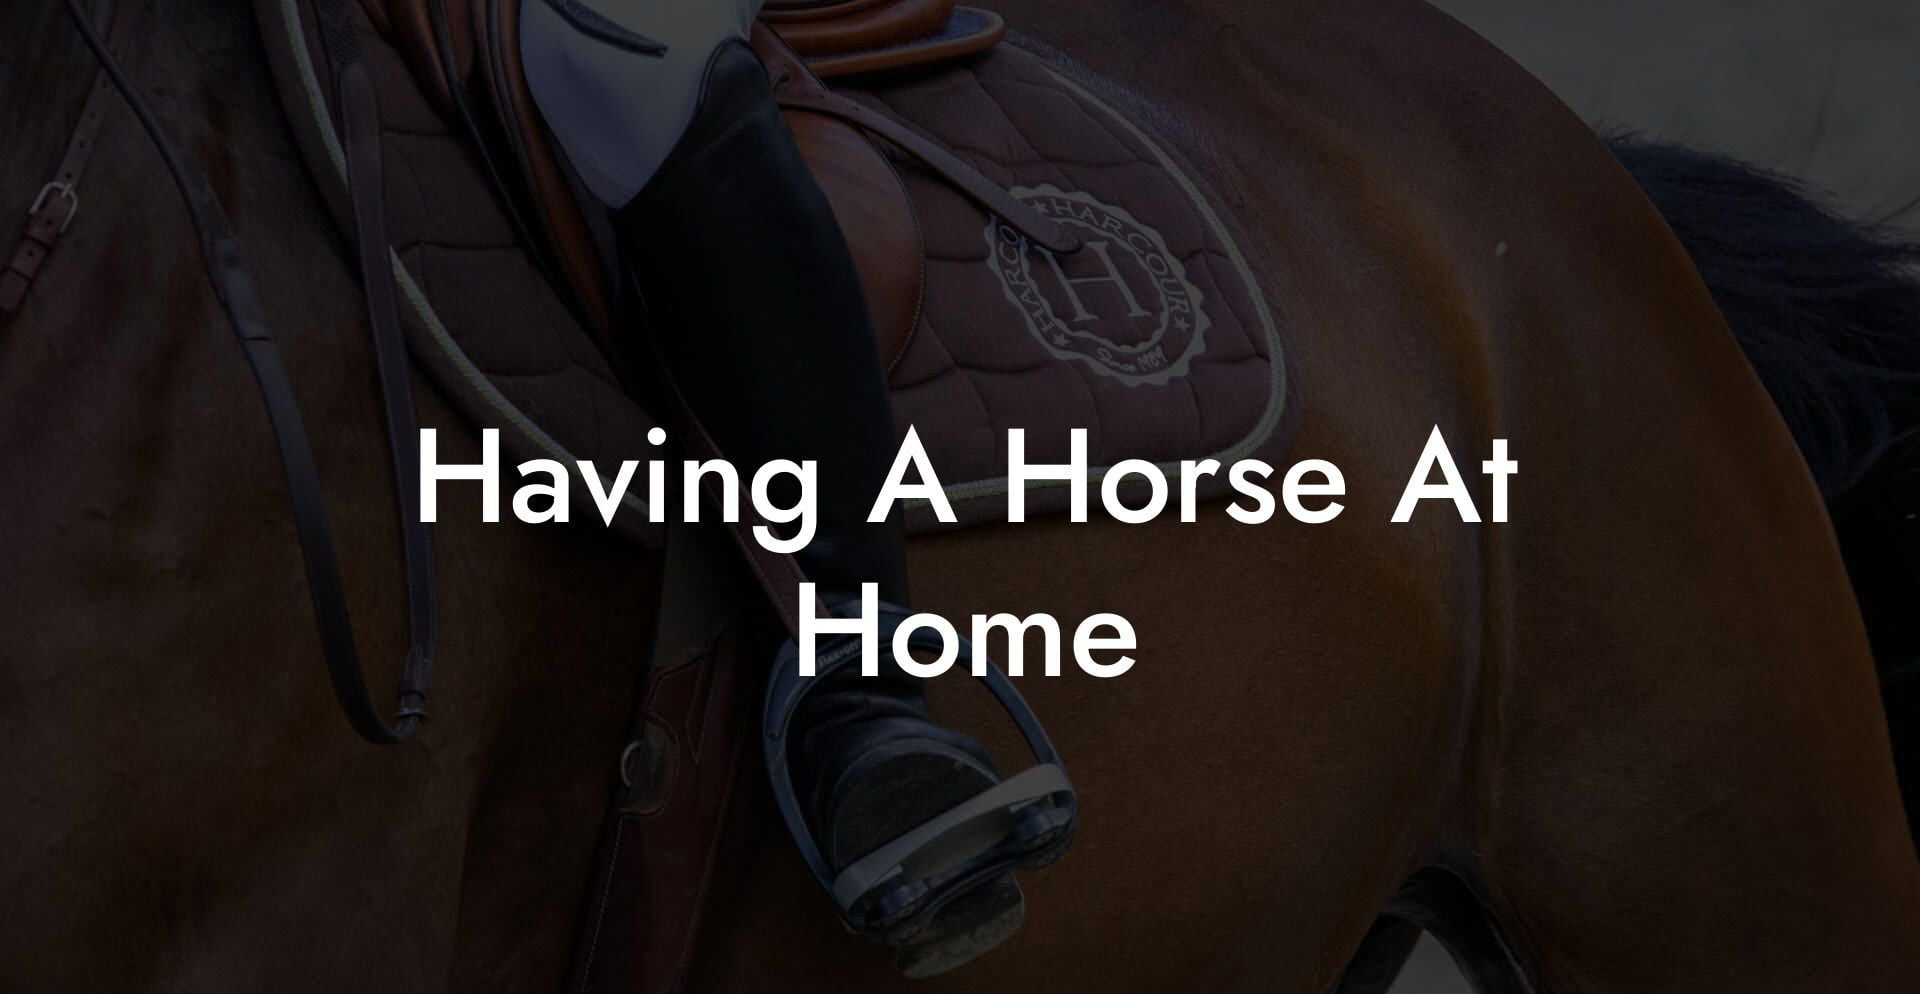 Having A Horse At Home